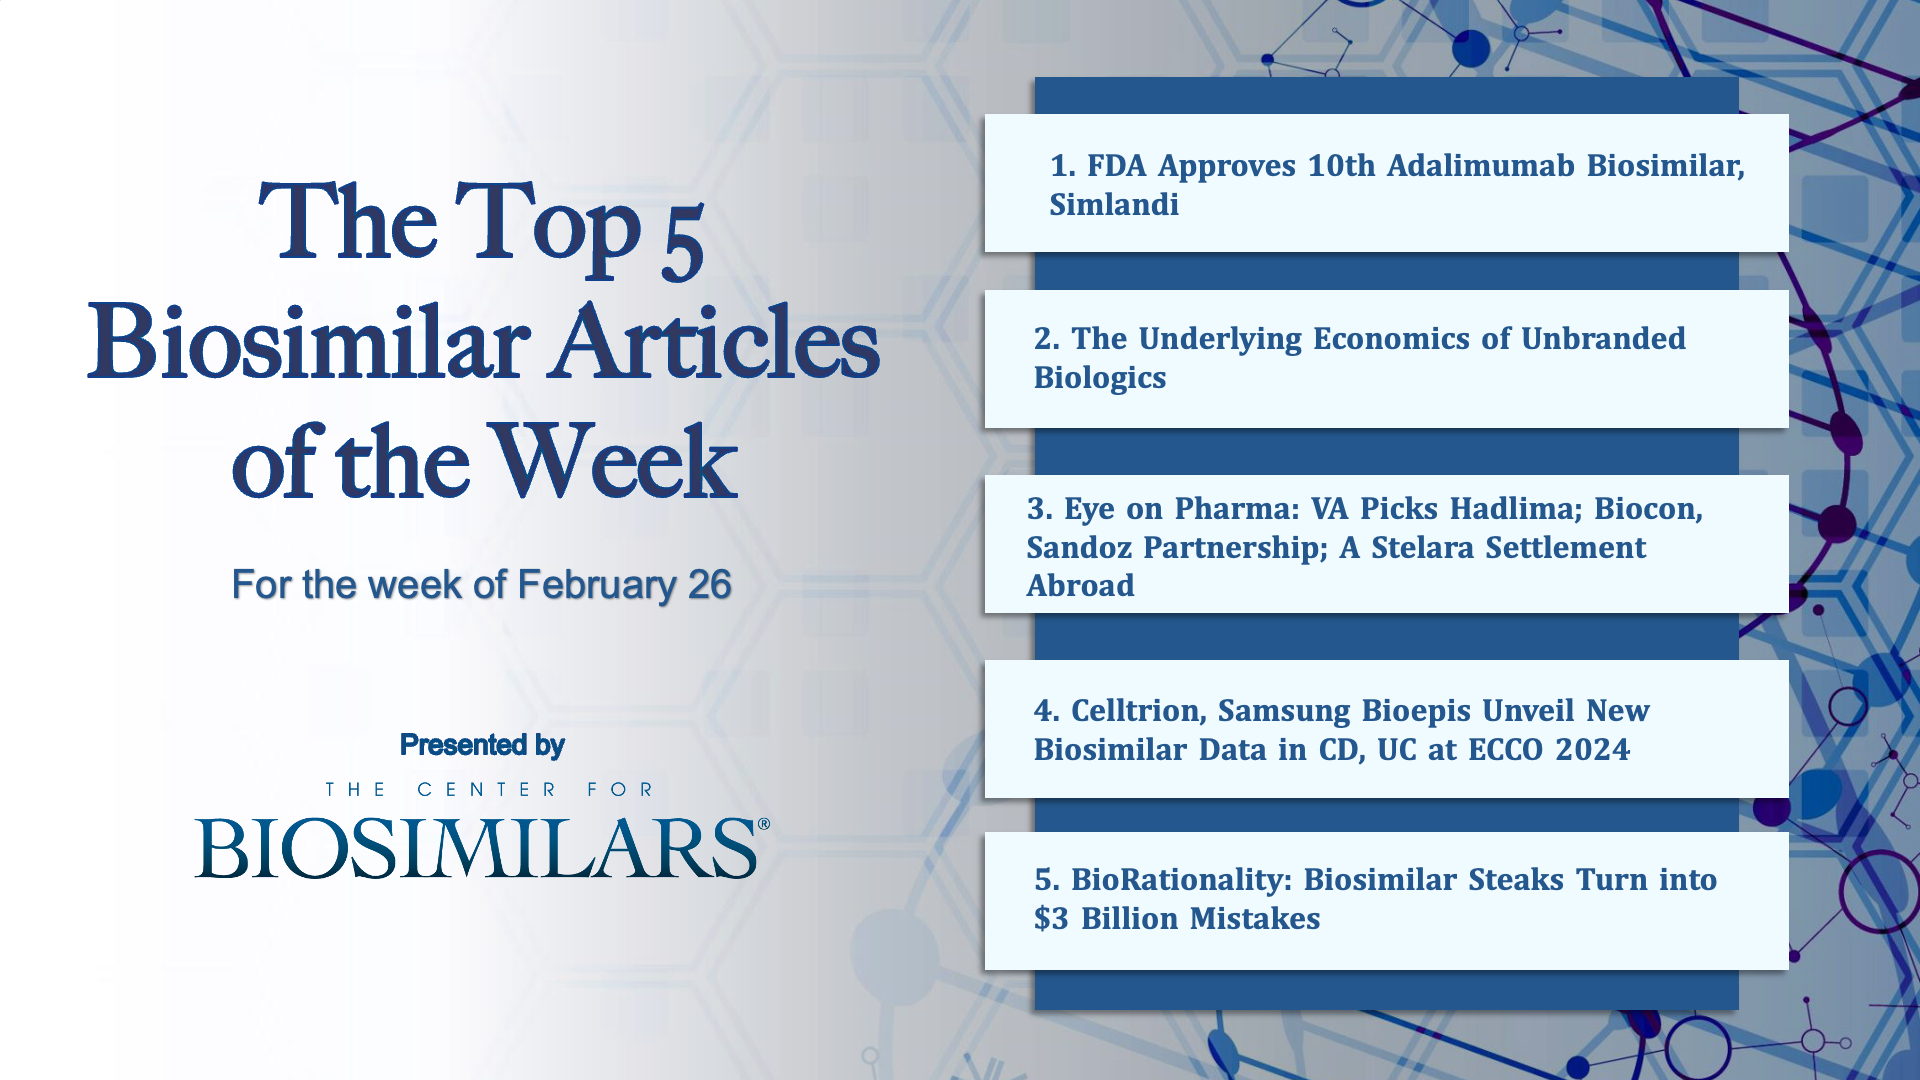 The Top 5 Biosimilar Articles for the Week of February 26